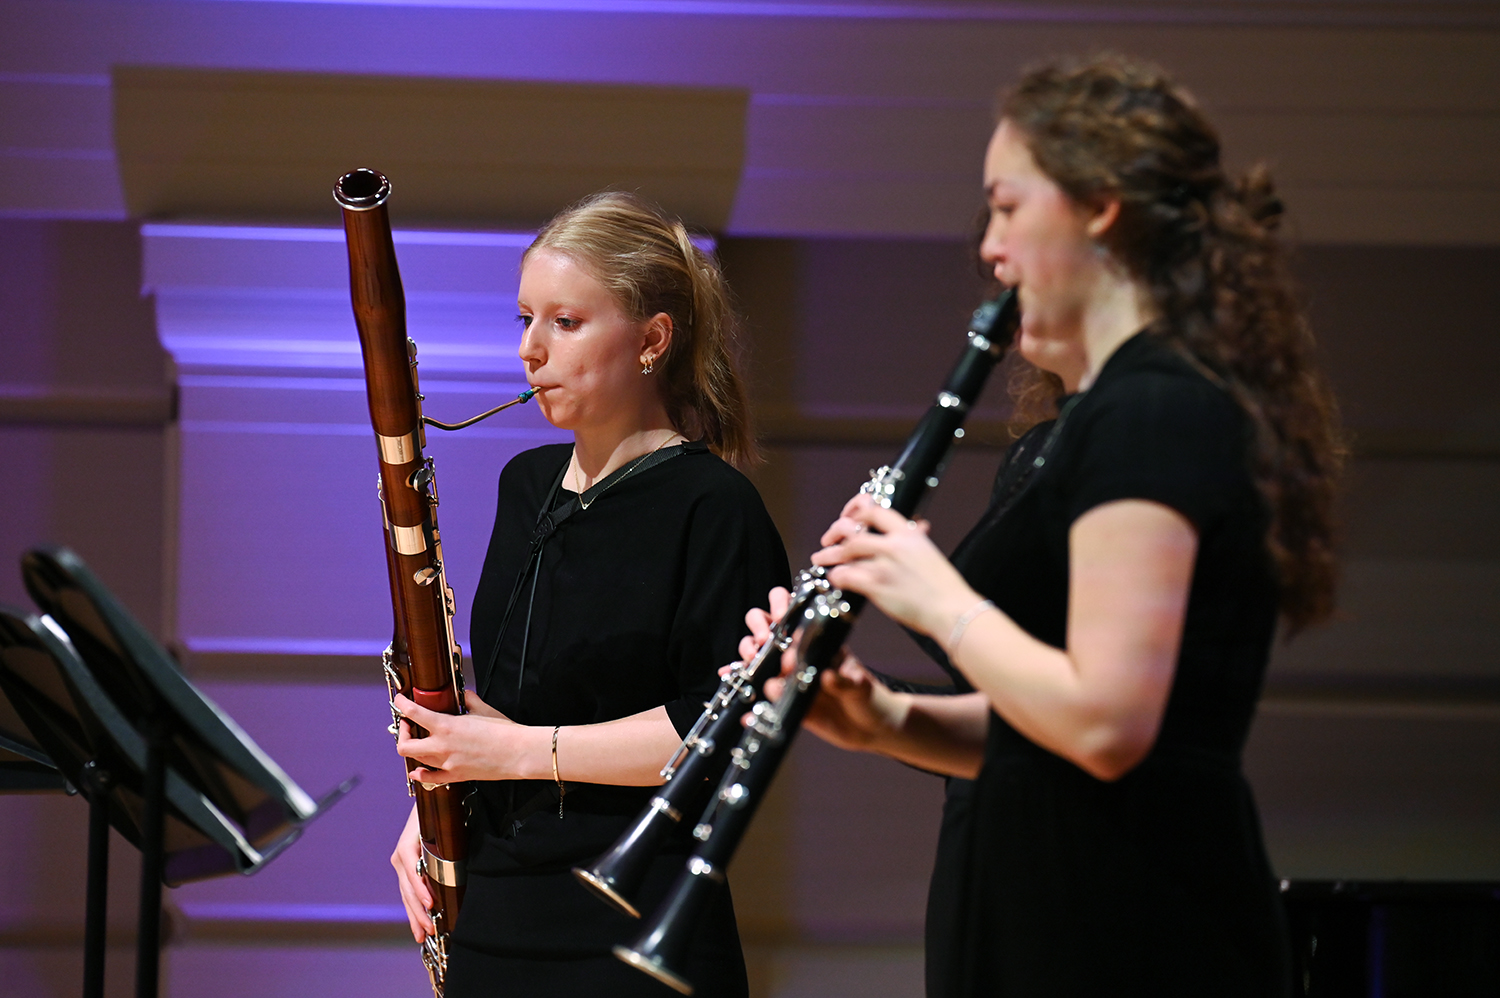 A bassoonist and a oboist performing in the Performance Hall